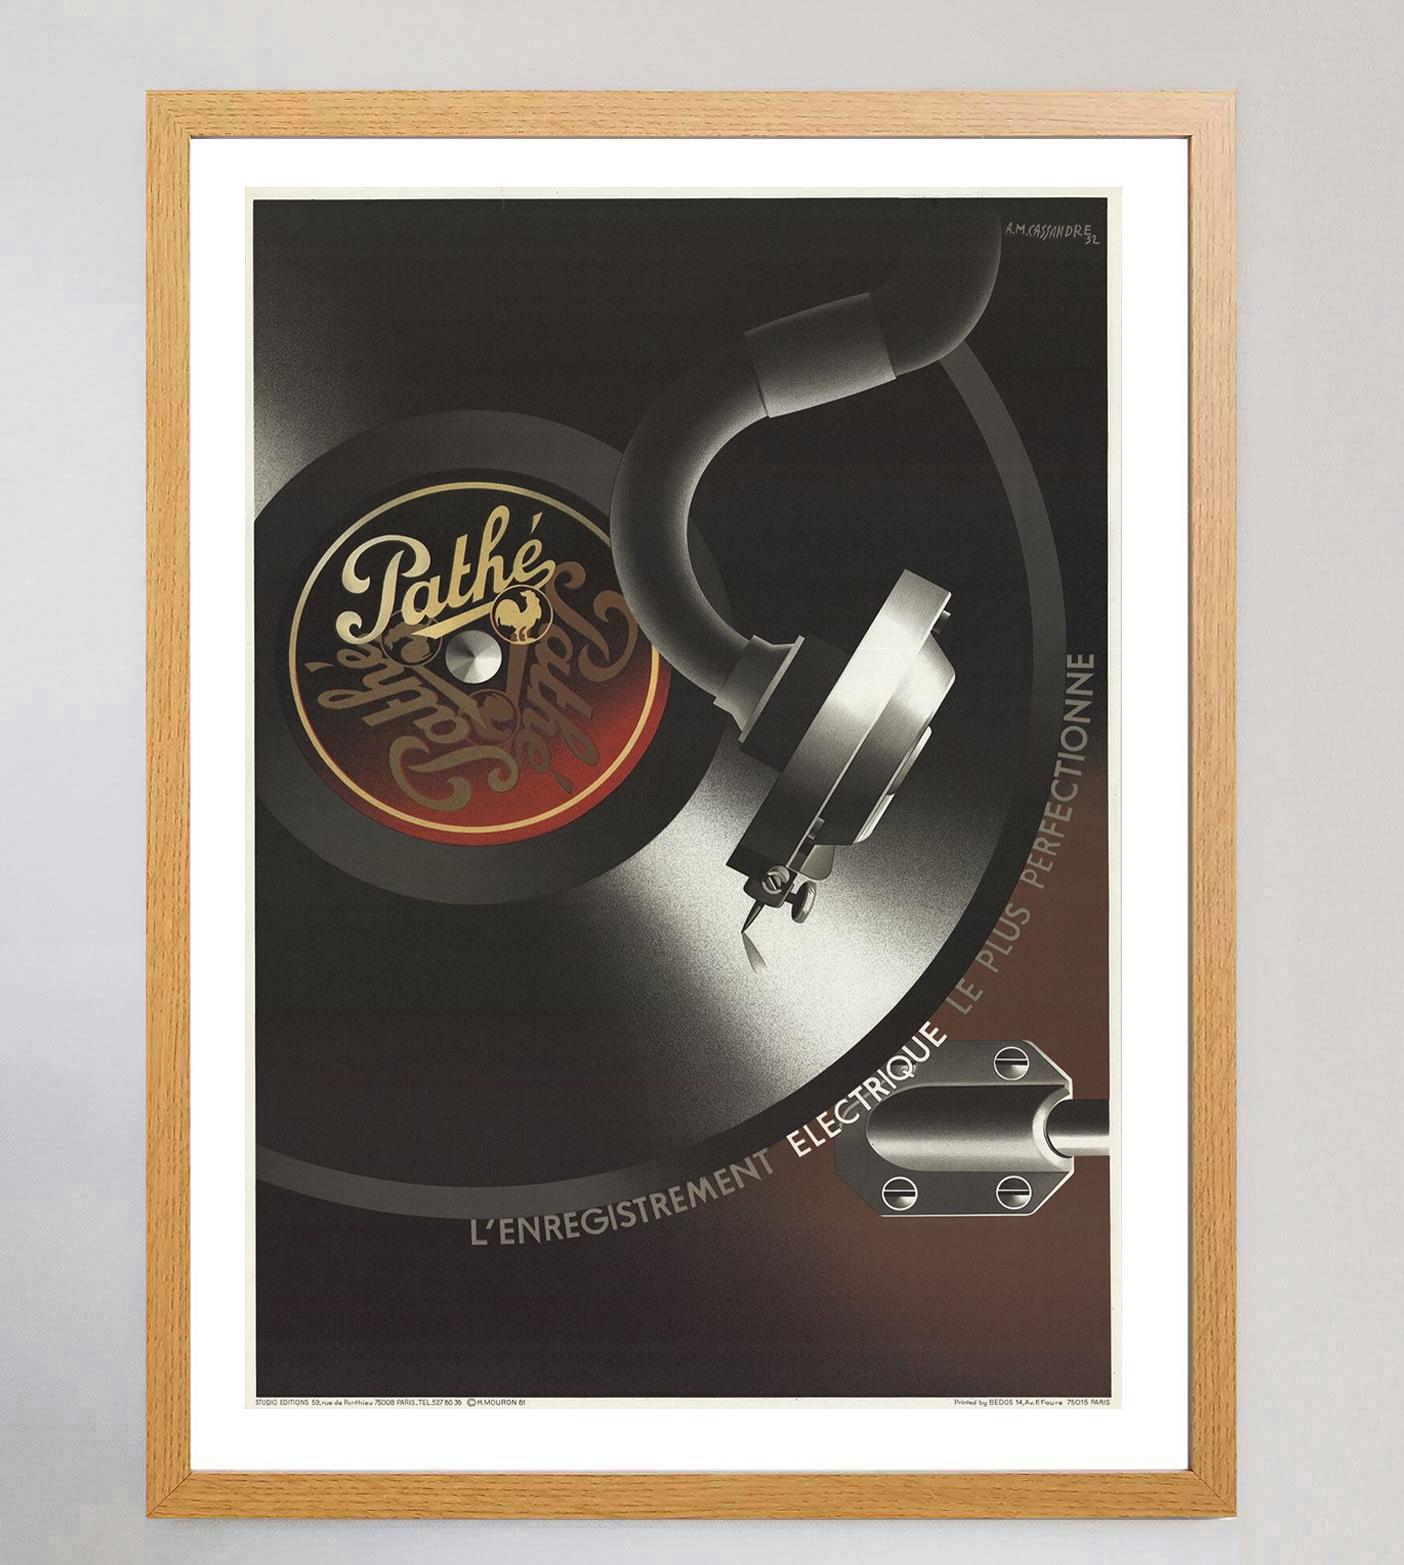 French 1981 Pathe Record Player Original Vintage Poster For Sale